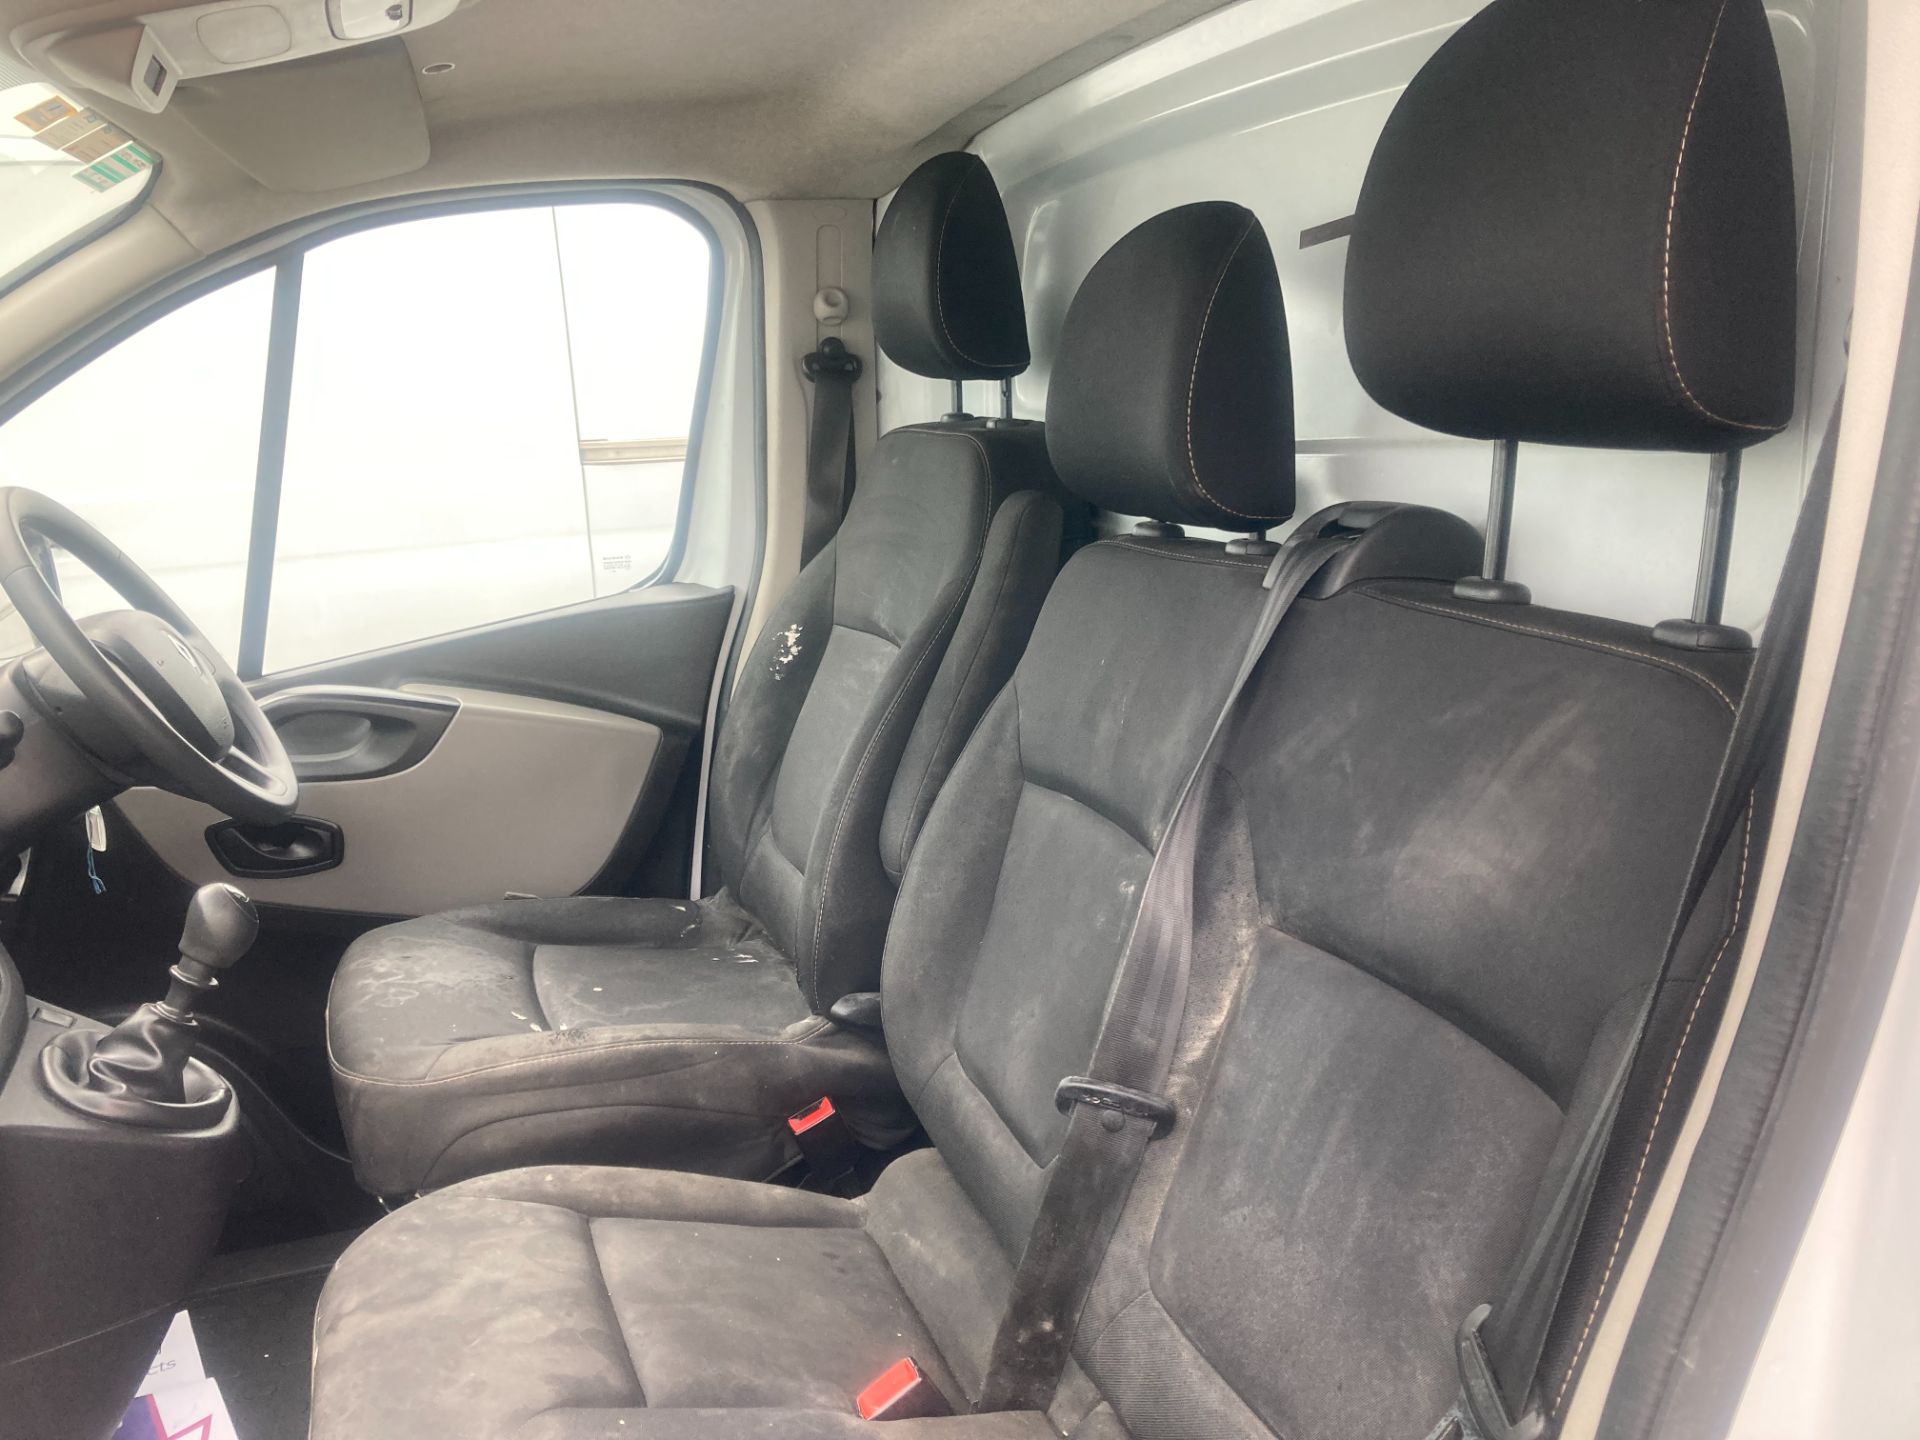 2019 Renault Trafic LL29 DCI 120 Business (191D38363) Thumbnail 10